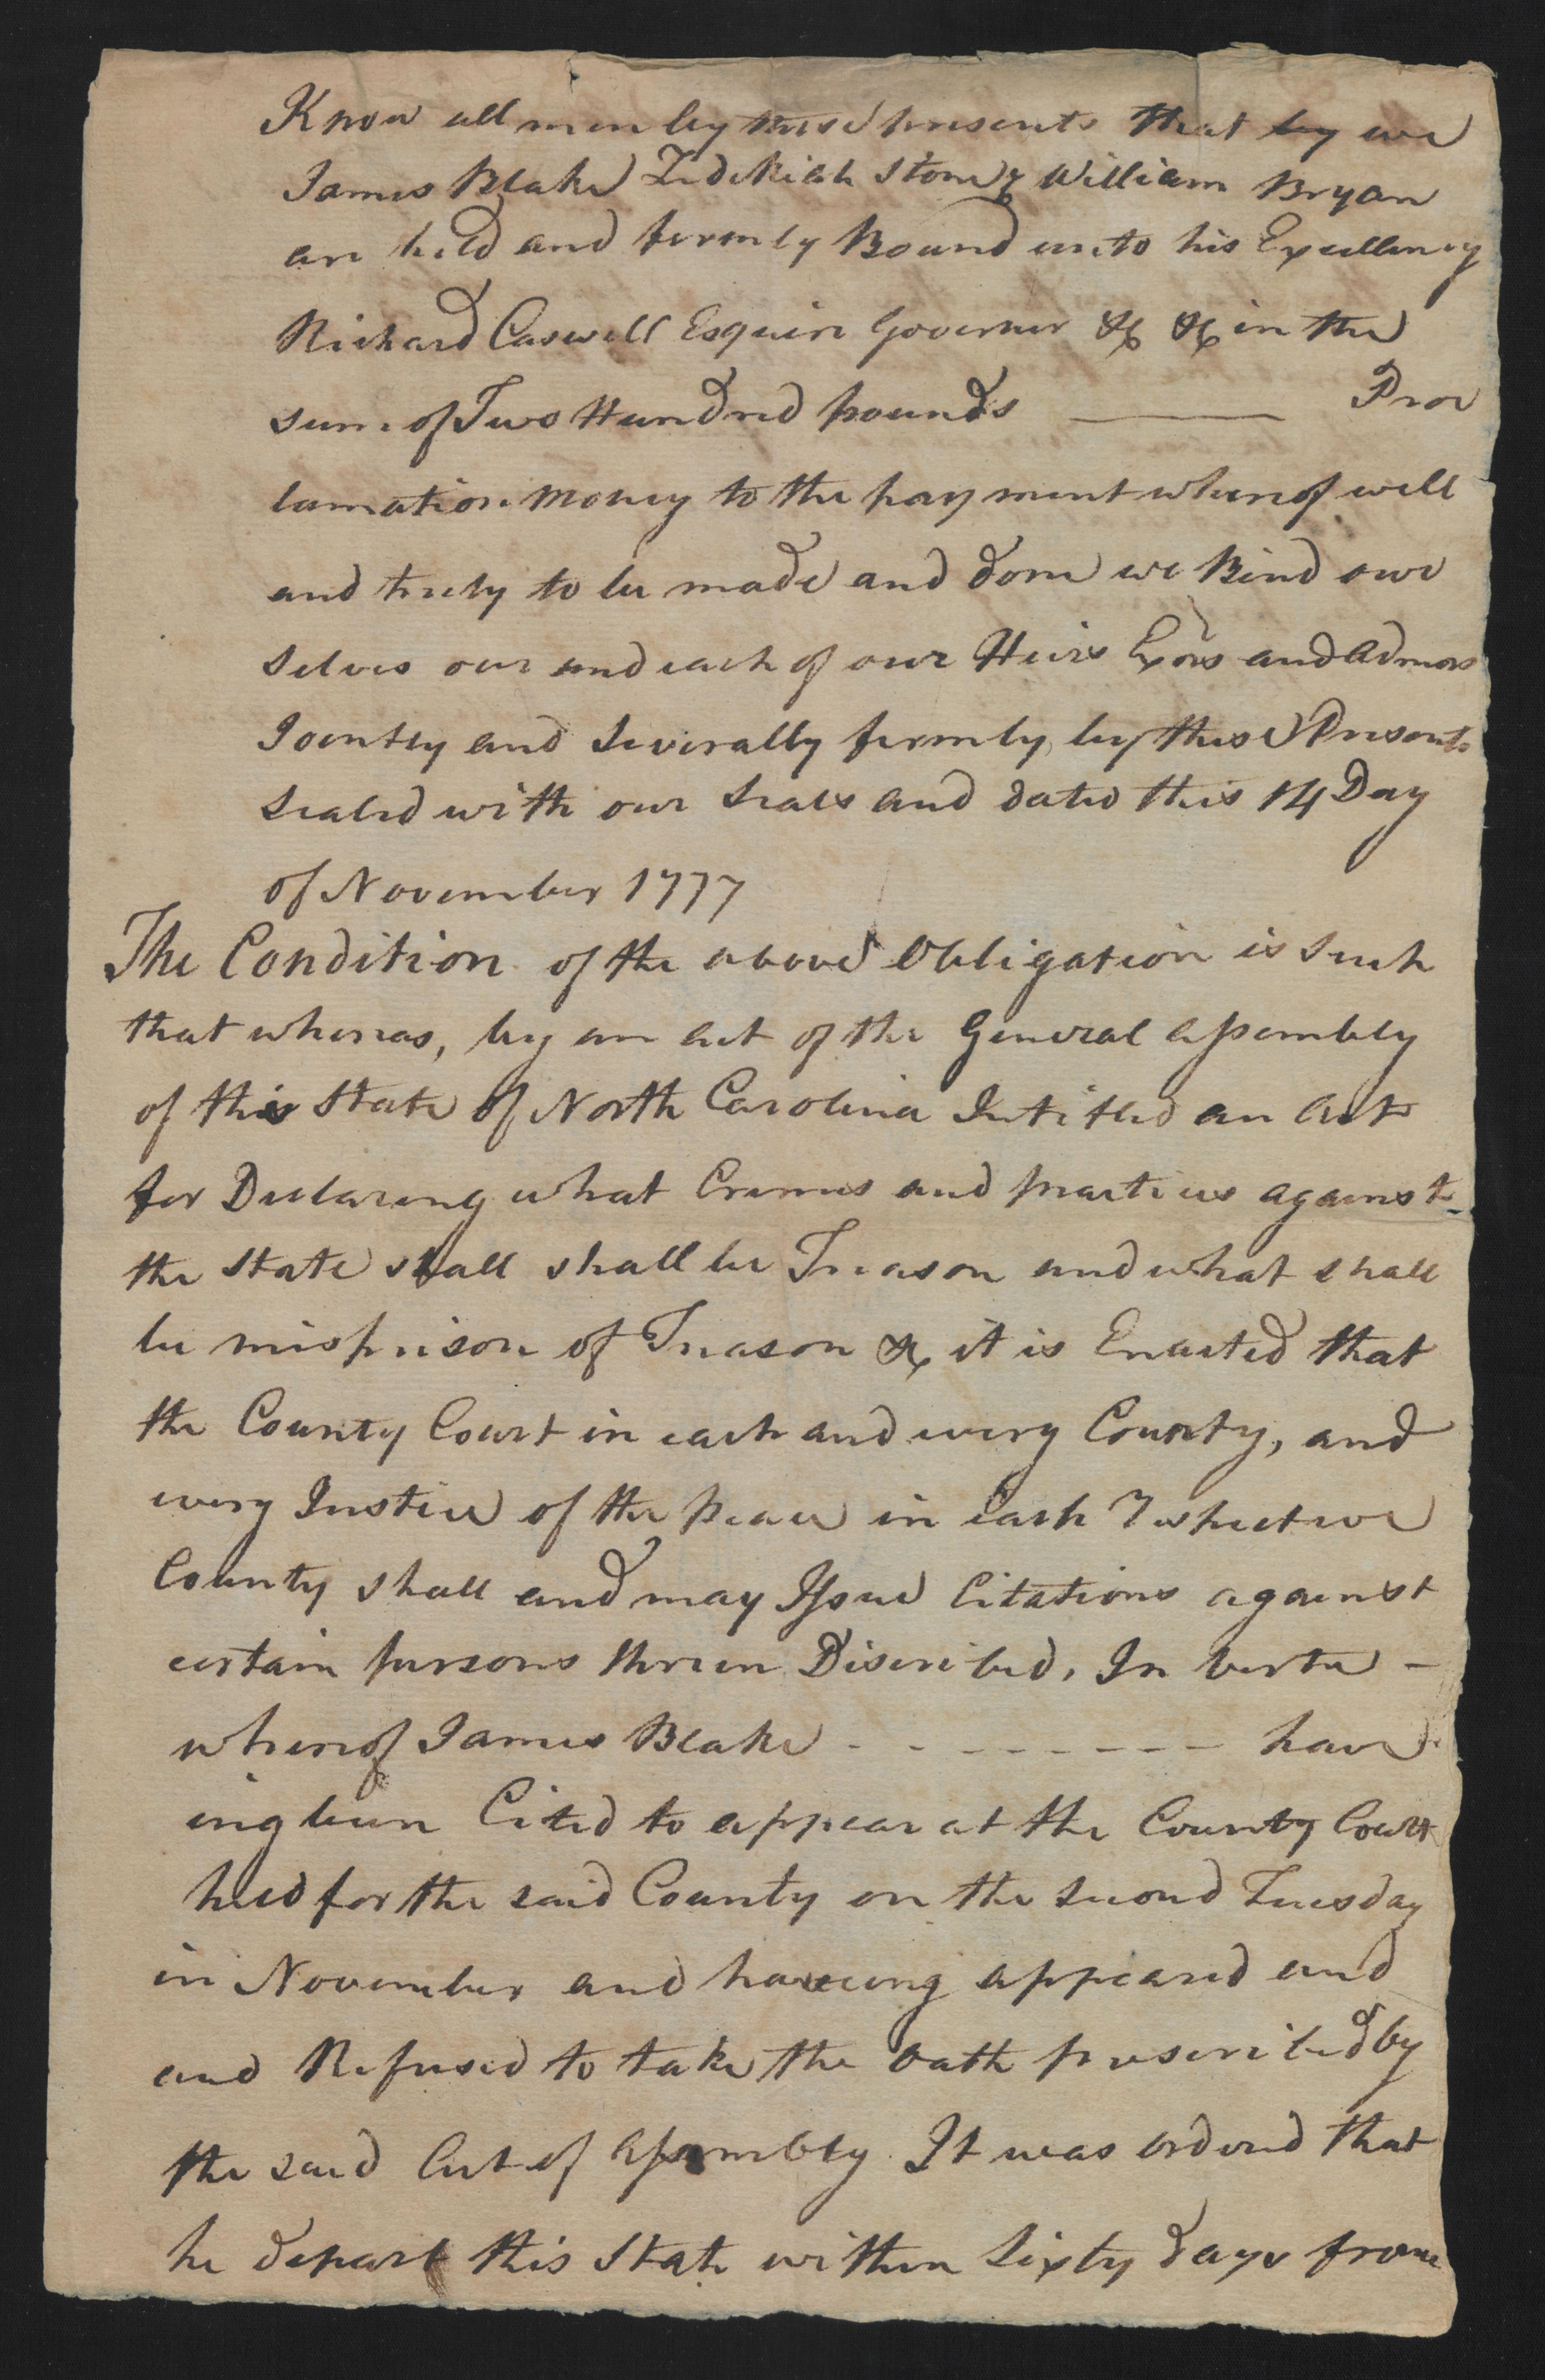 Bond from the Bertie County Court for James Blake, 14 November 1777, page 1